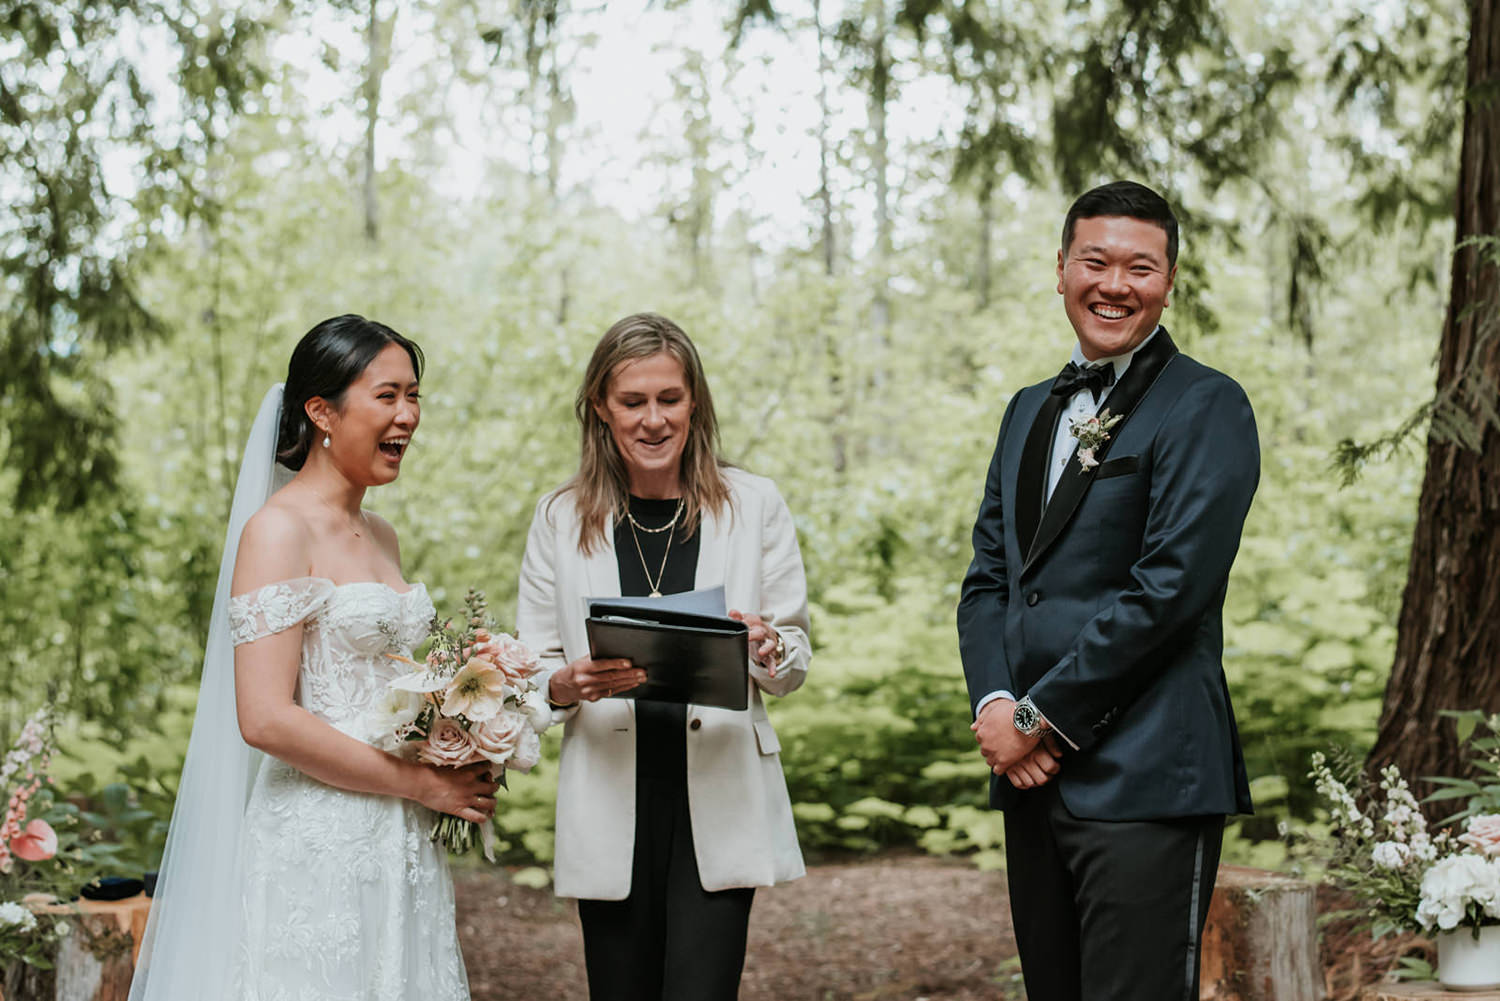 Pemberton wedding ceremony in the forest at Ancient Cedars Lodge